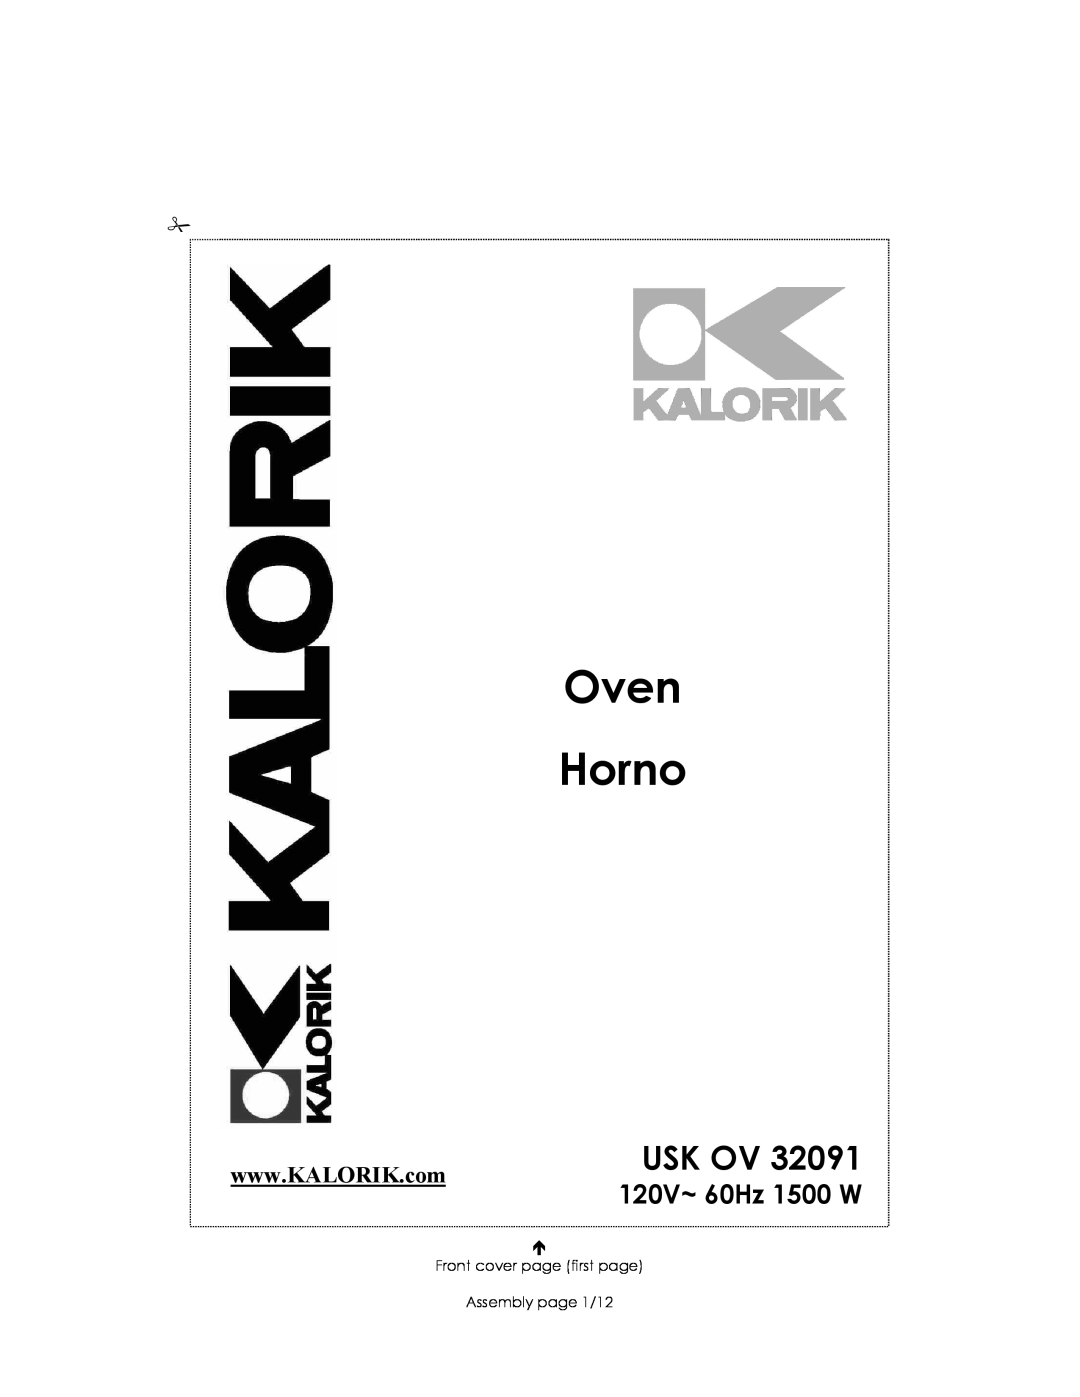 Kalorik USK OV 32091 manual 120V~ 60Hz 1500 W, Oven Horno, Usk Ov, Front cover page first page Assembly page 1/12 